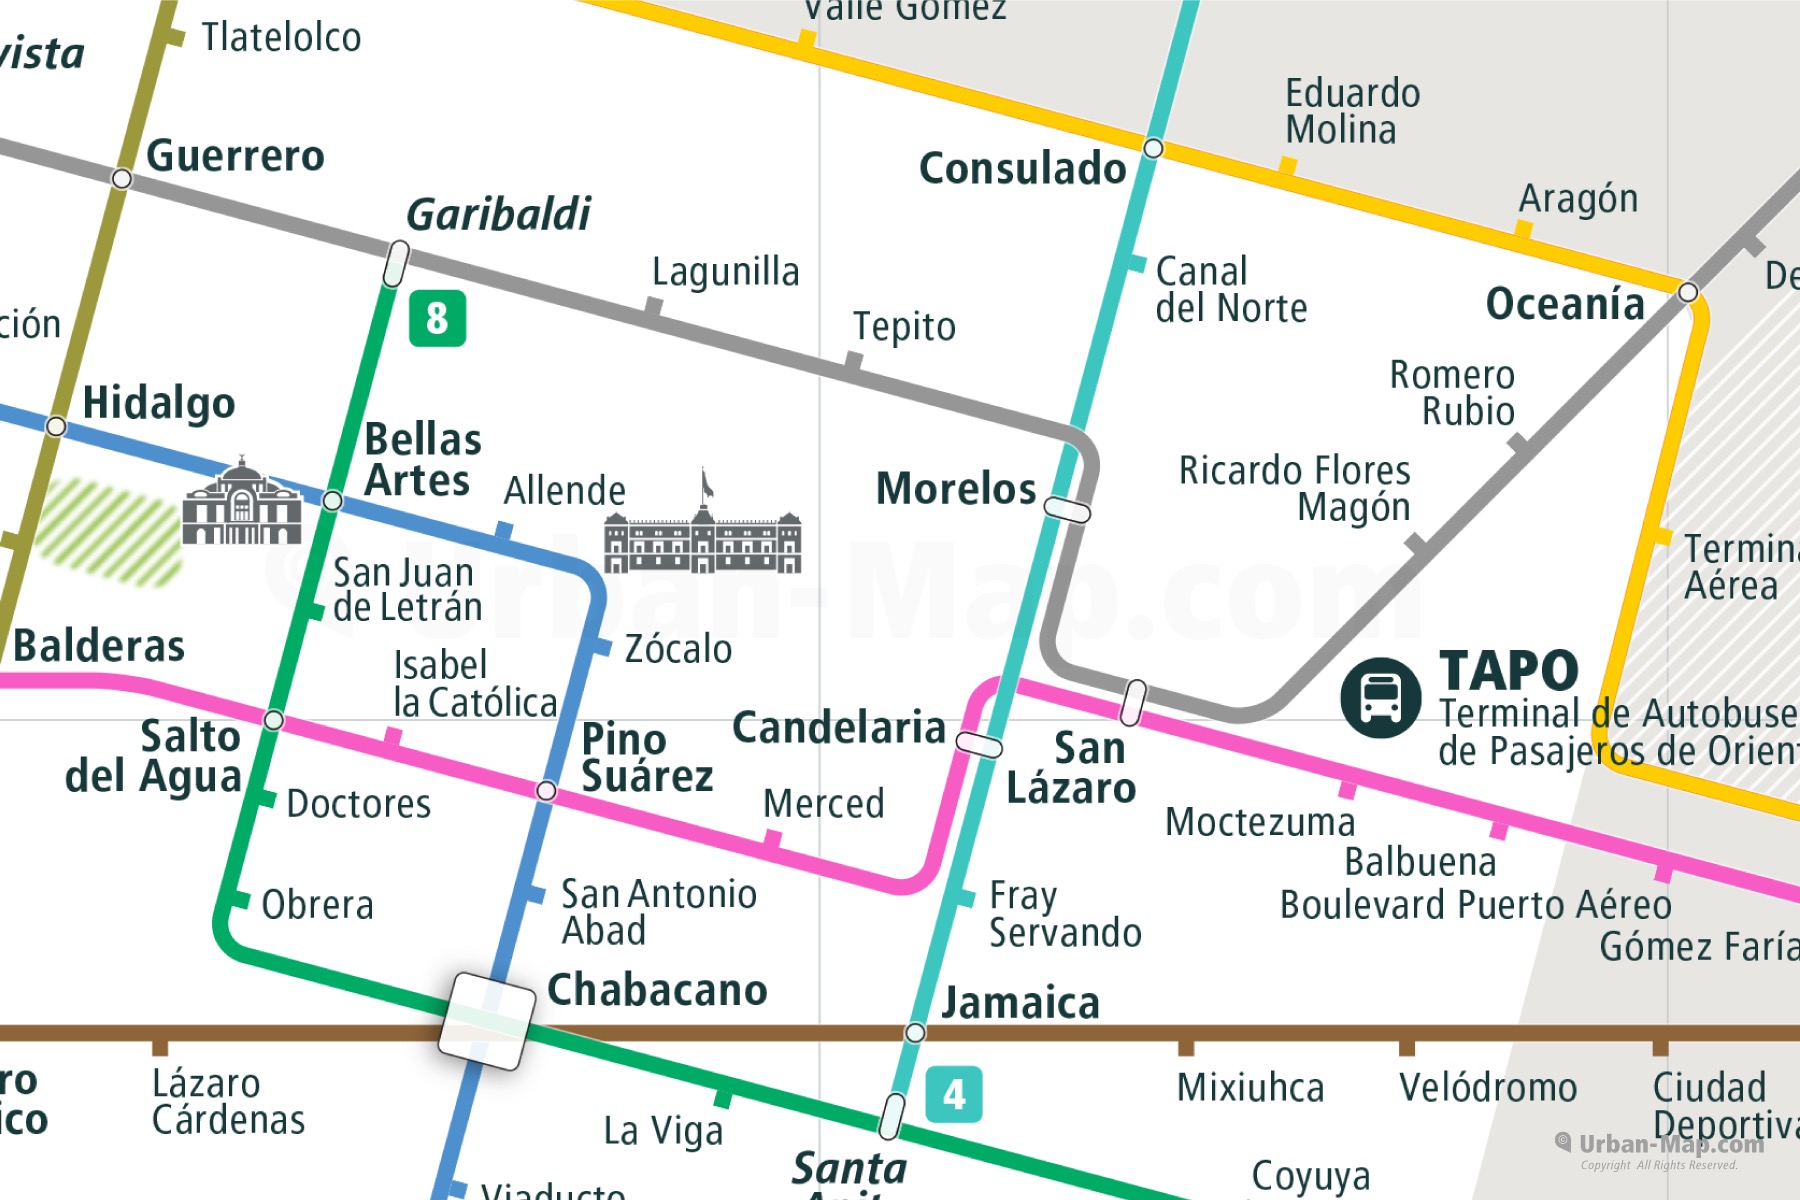 Mexico City Rail Map shows the train and public transportation routes of metro - Close-Up